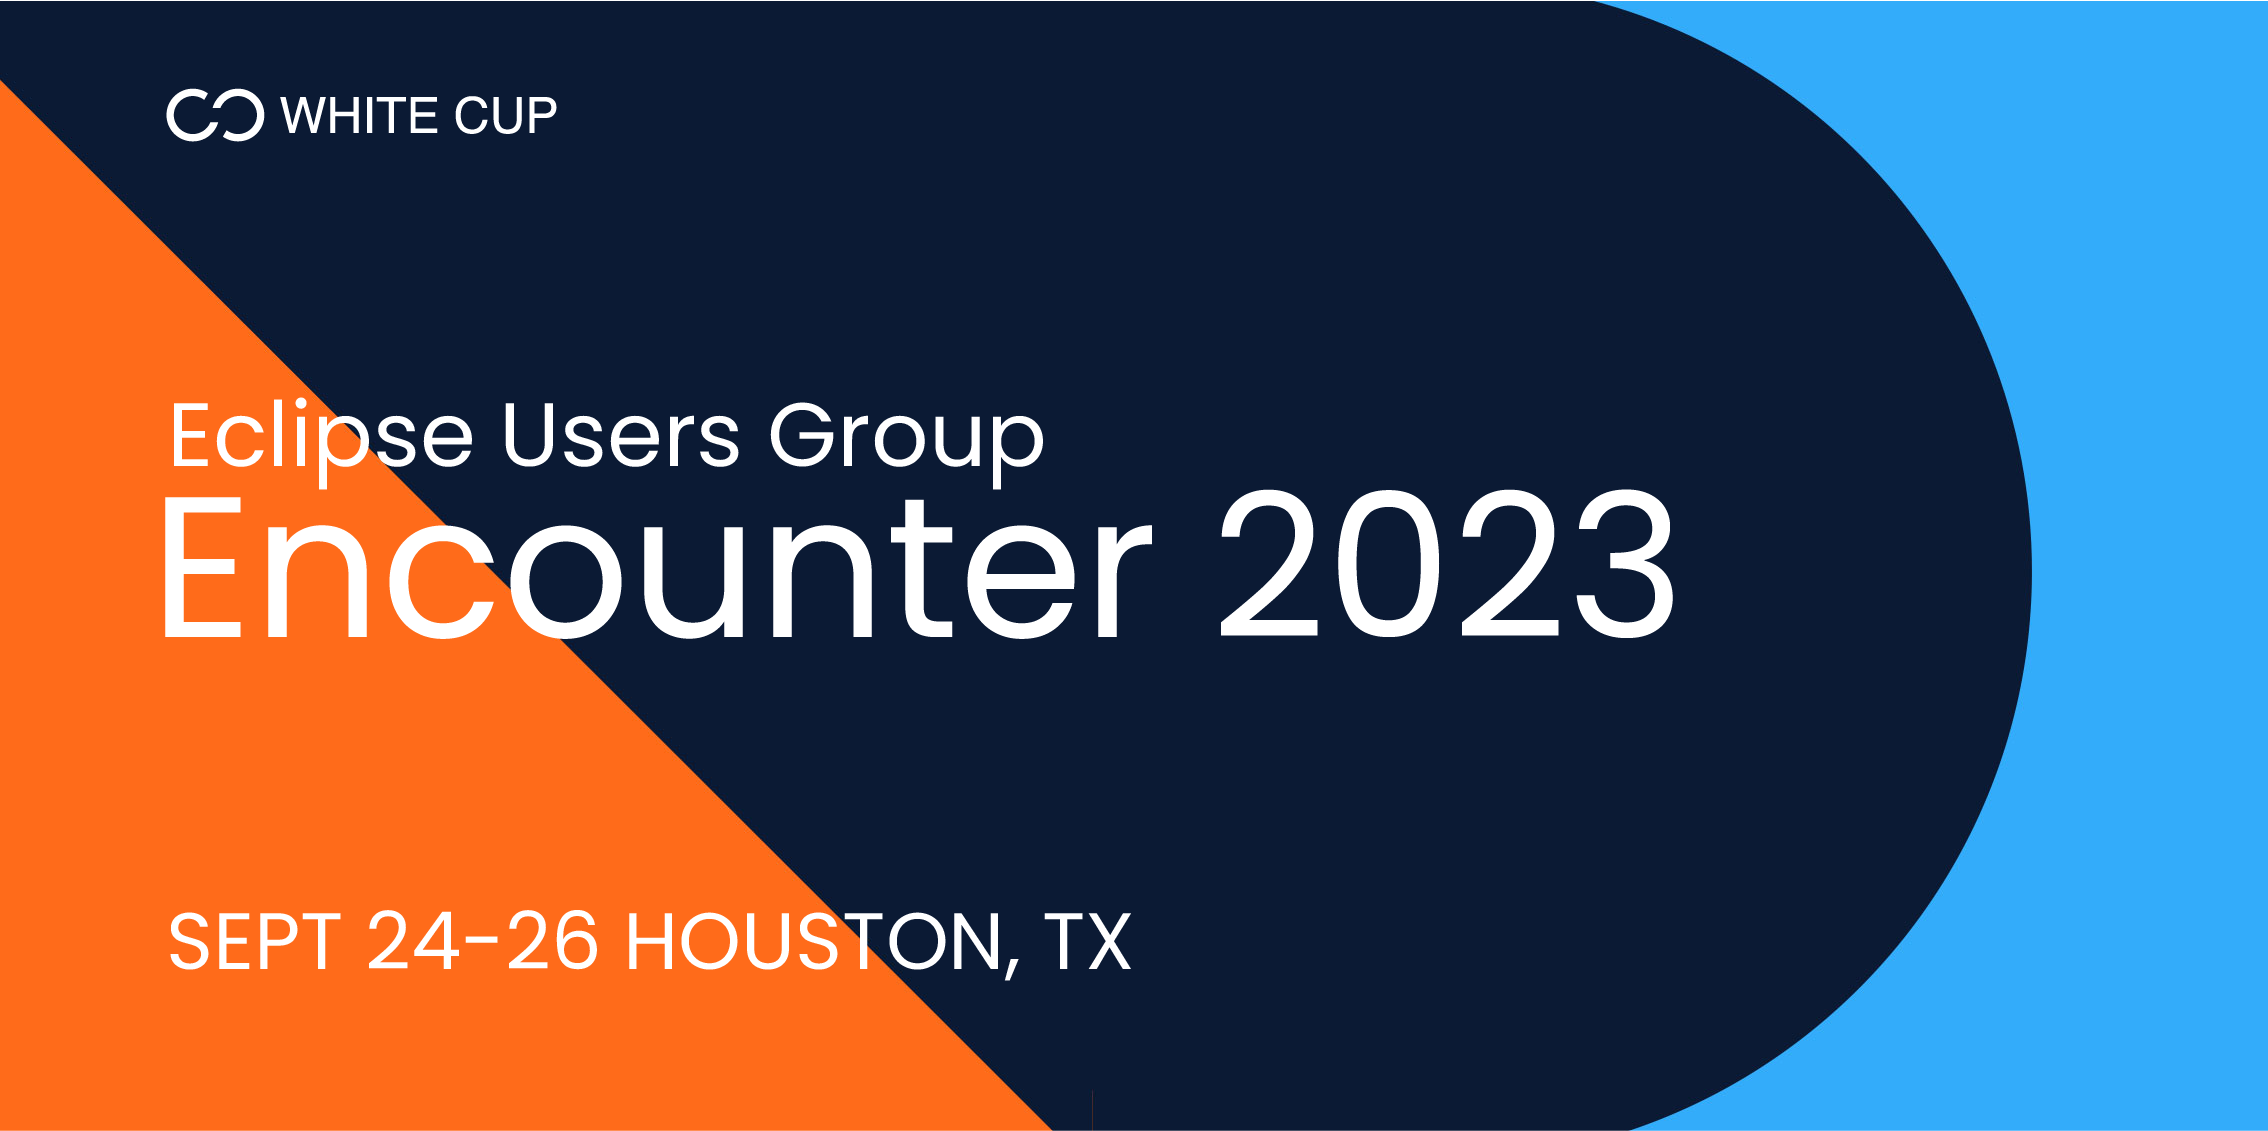 Eclipse Users Group Encounter 2023 Sept 24-26 Houston, TX